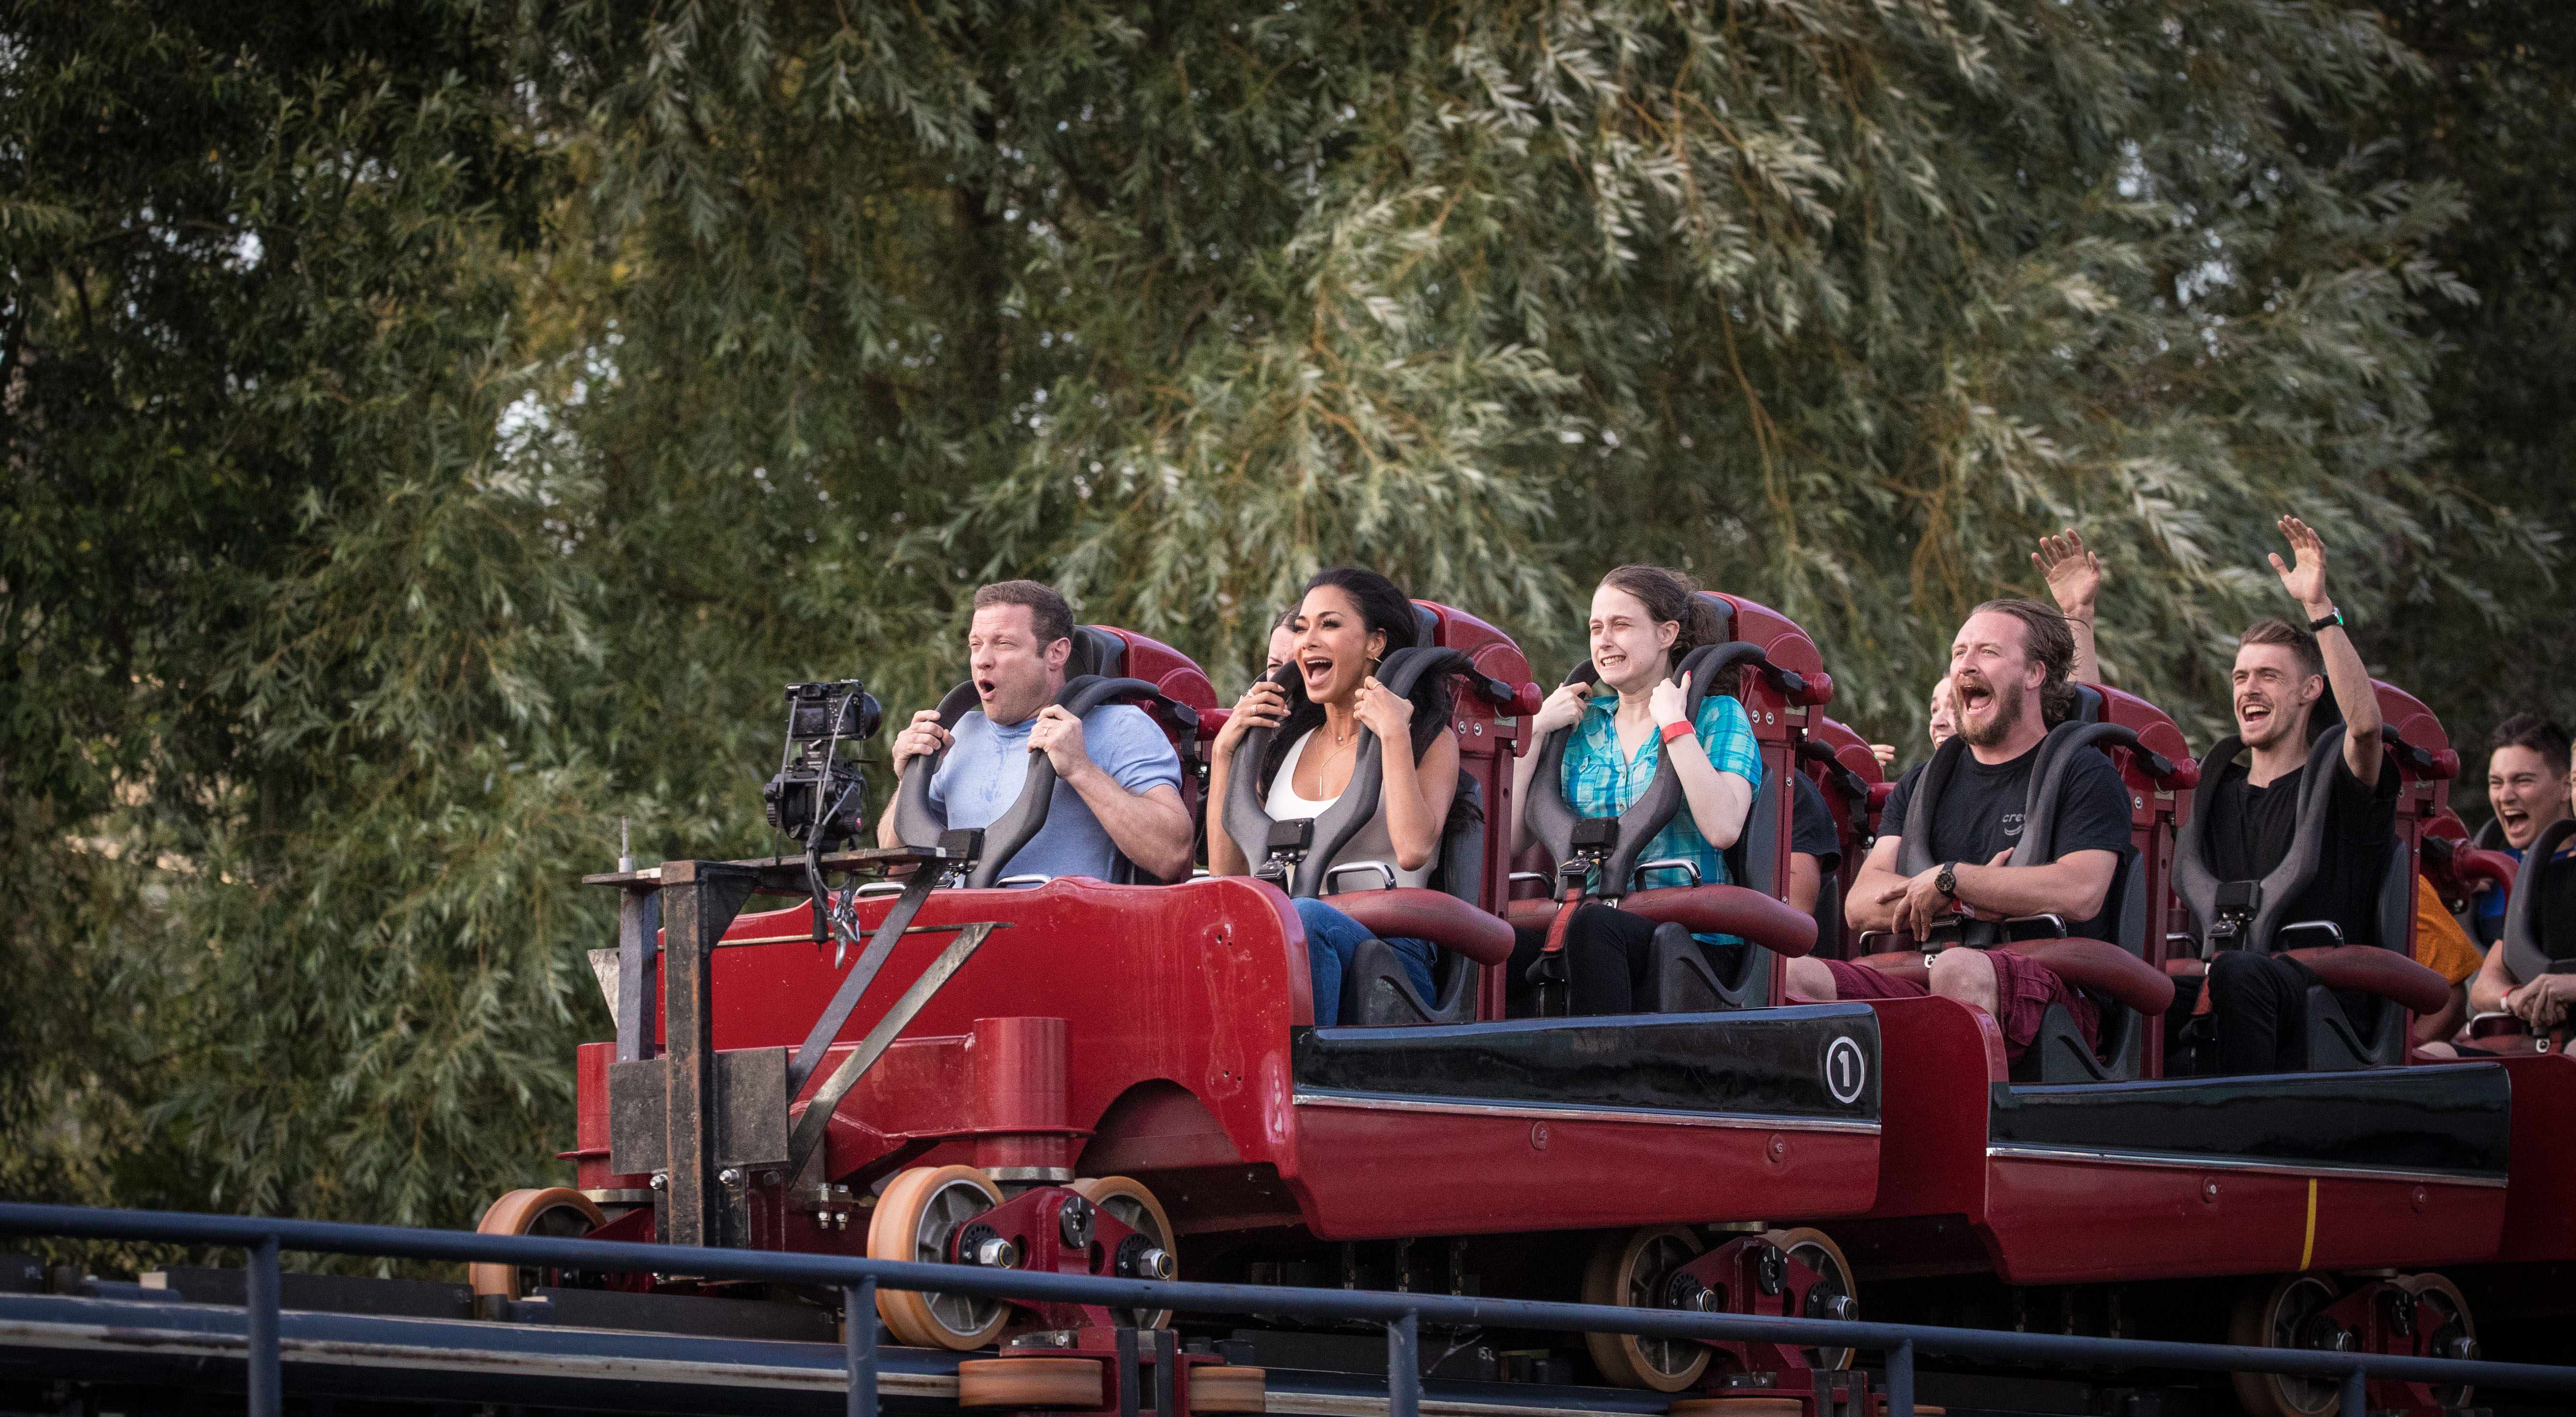 The X Factor team went to Thorpe Park